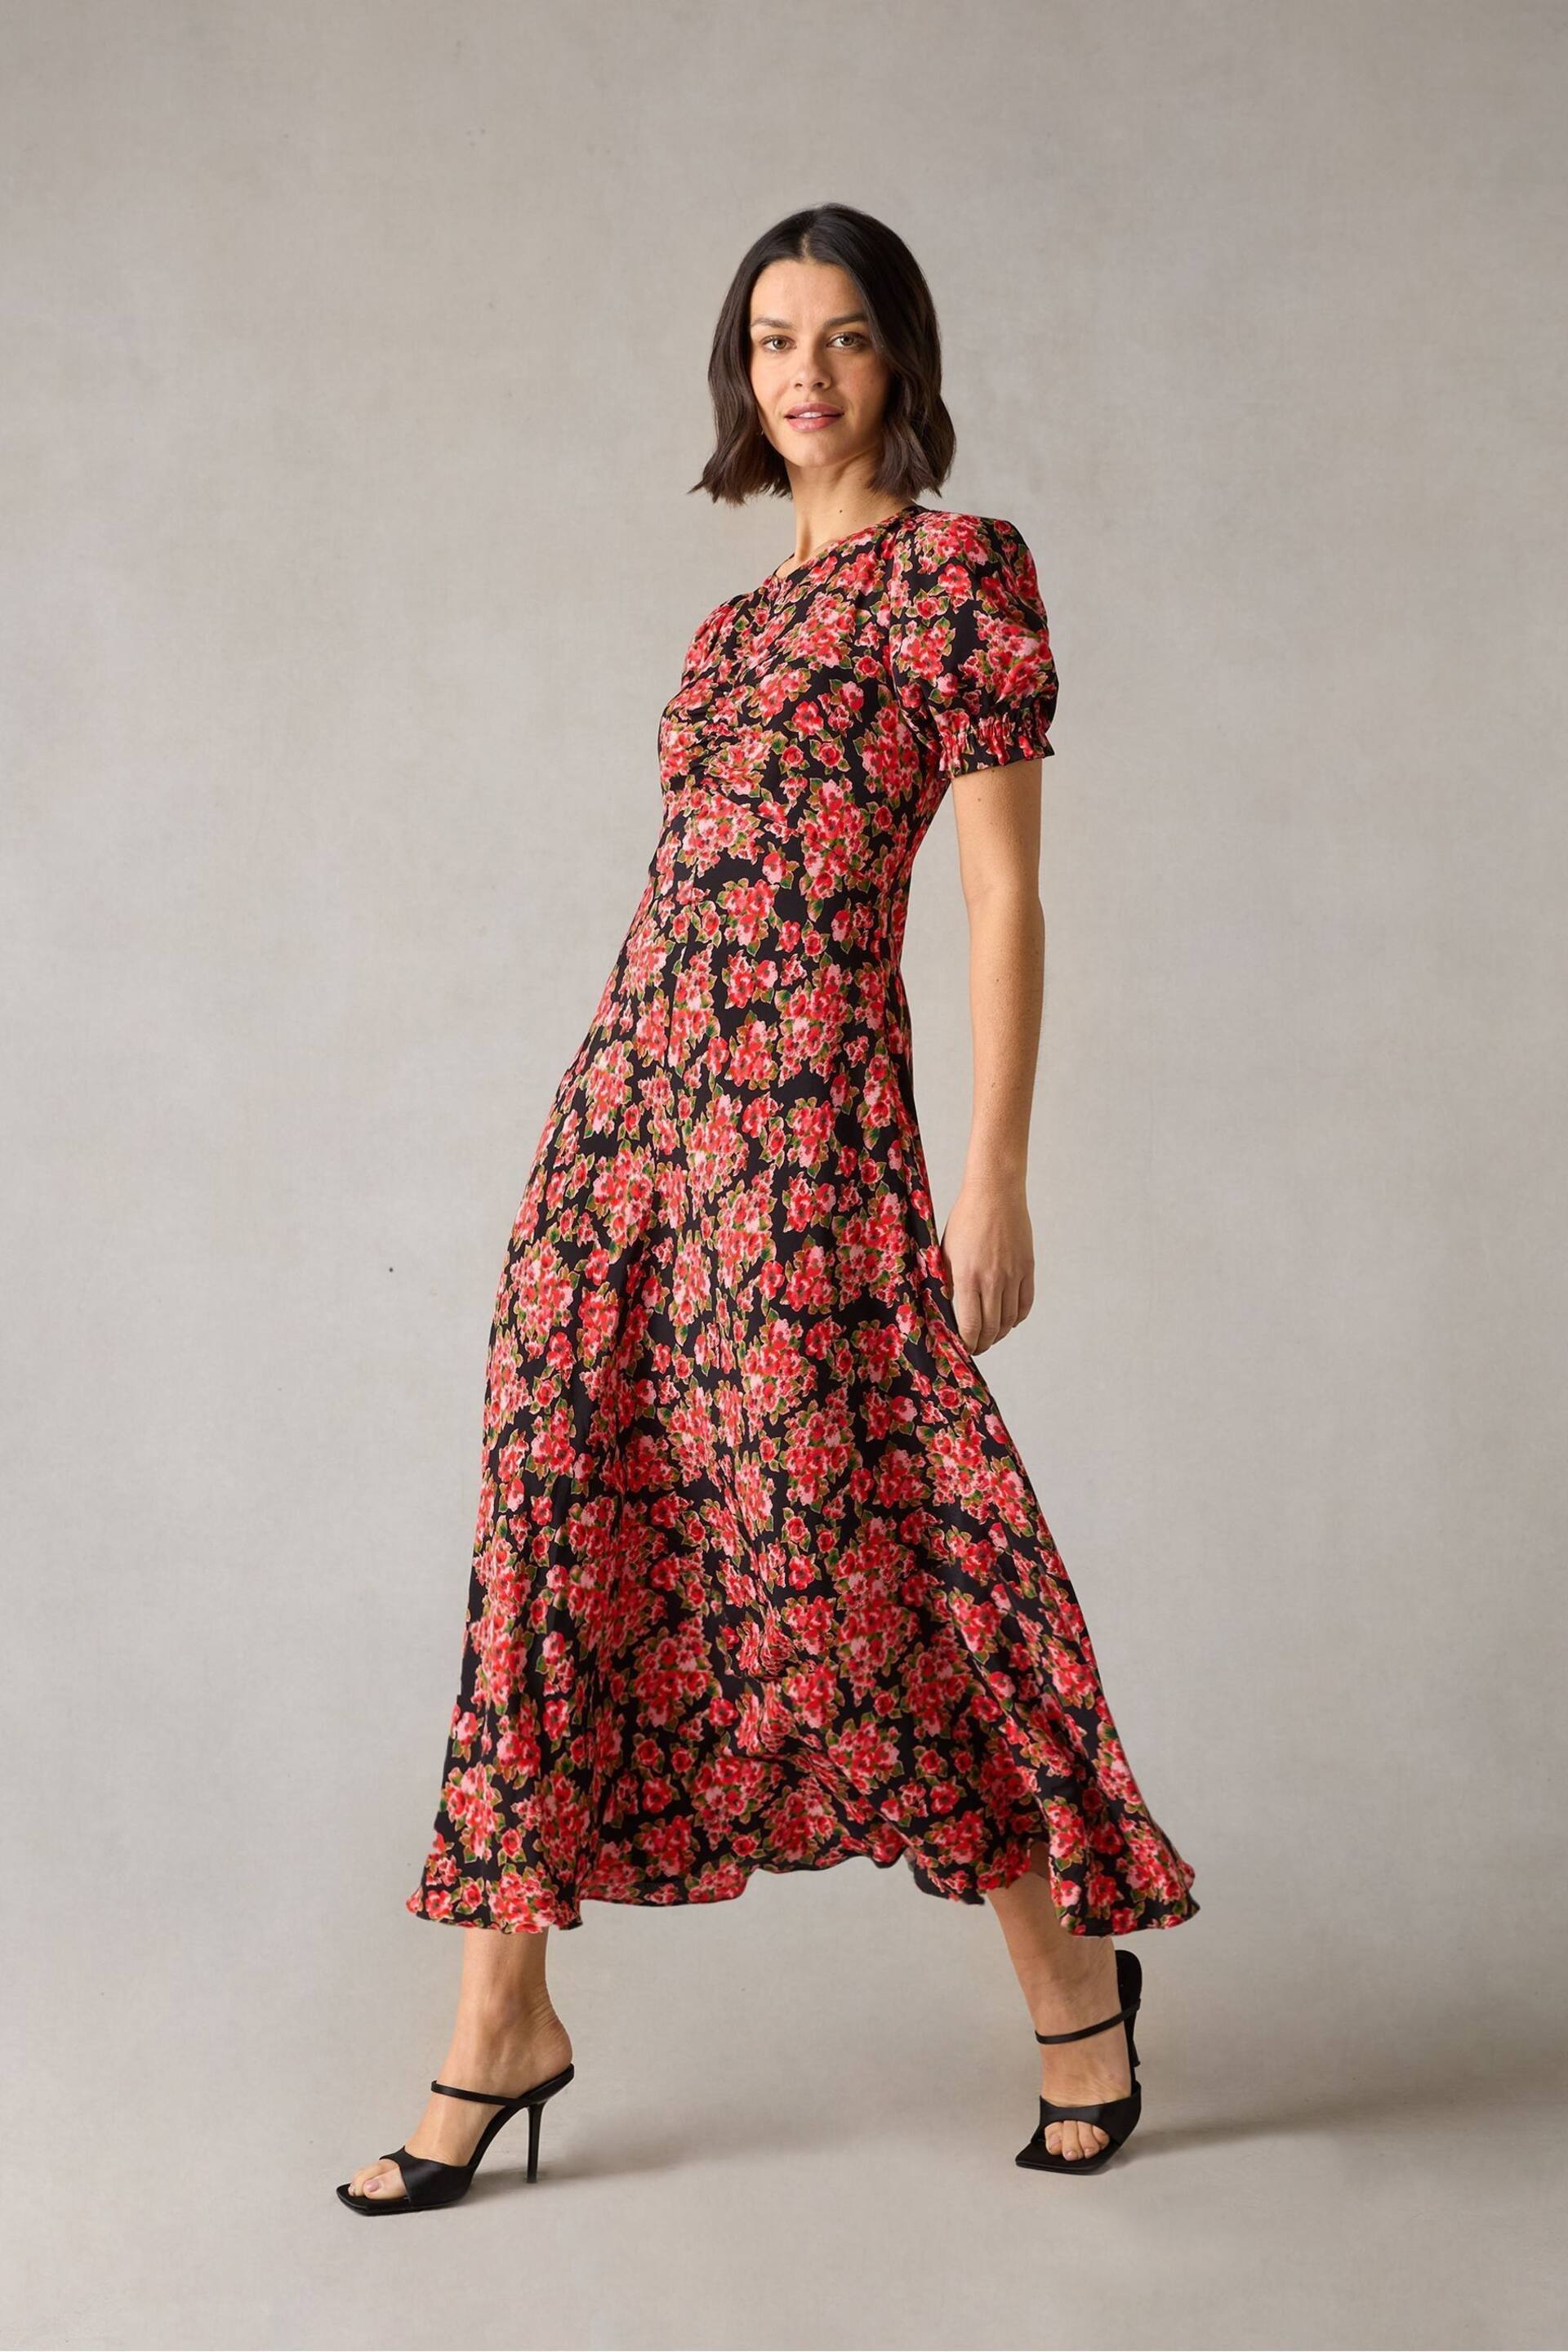 Ro&Zo Petite Red Rose Print Ruched Front Midi Dress - Image 4 of 5